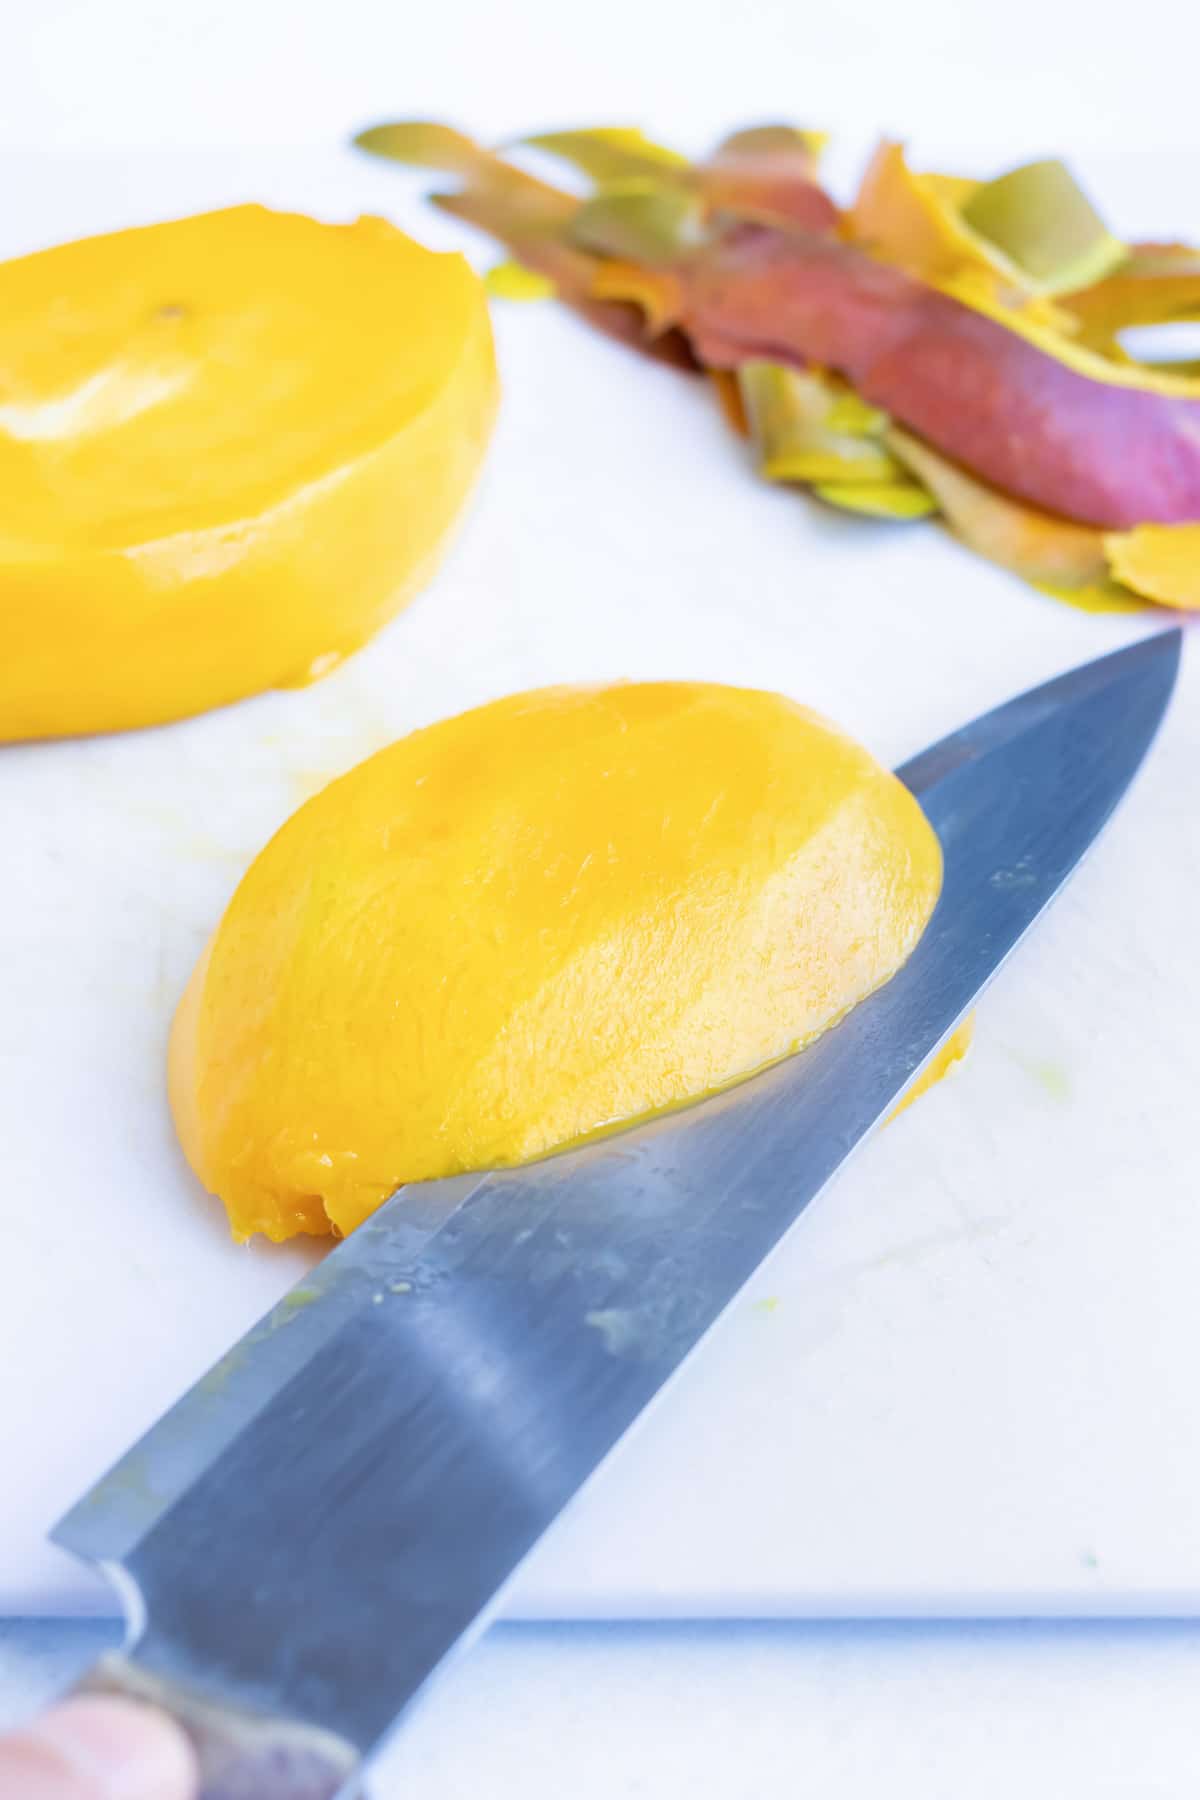 A knife making cuts across the mango while firmly holding it on a cutting board.